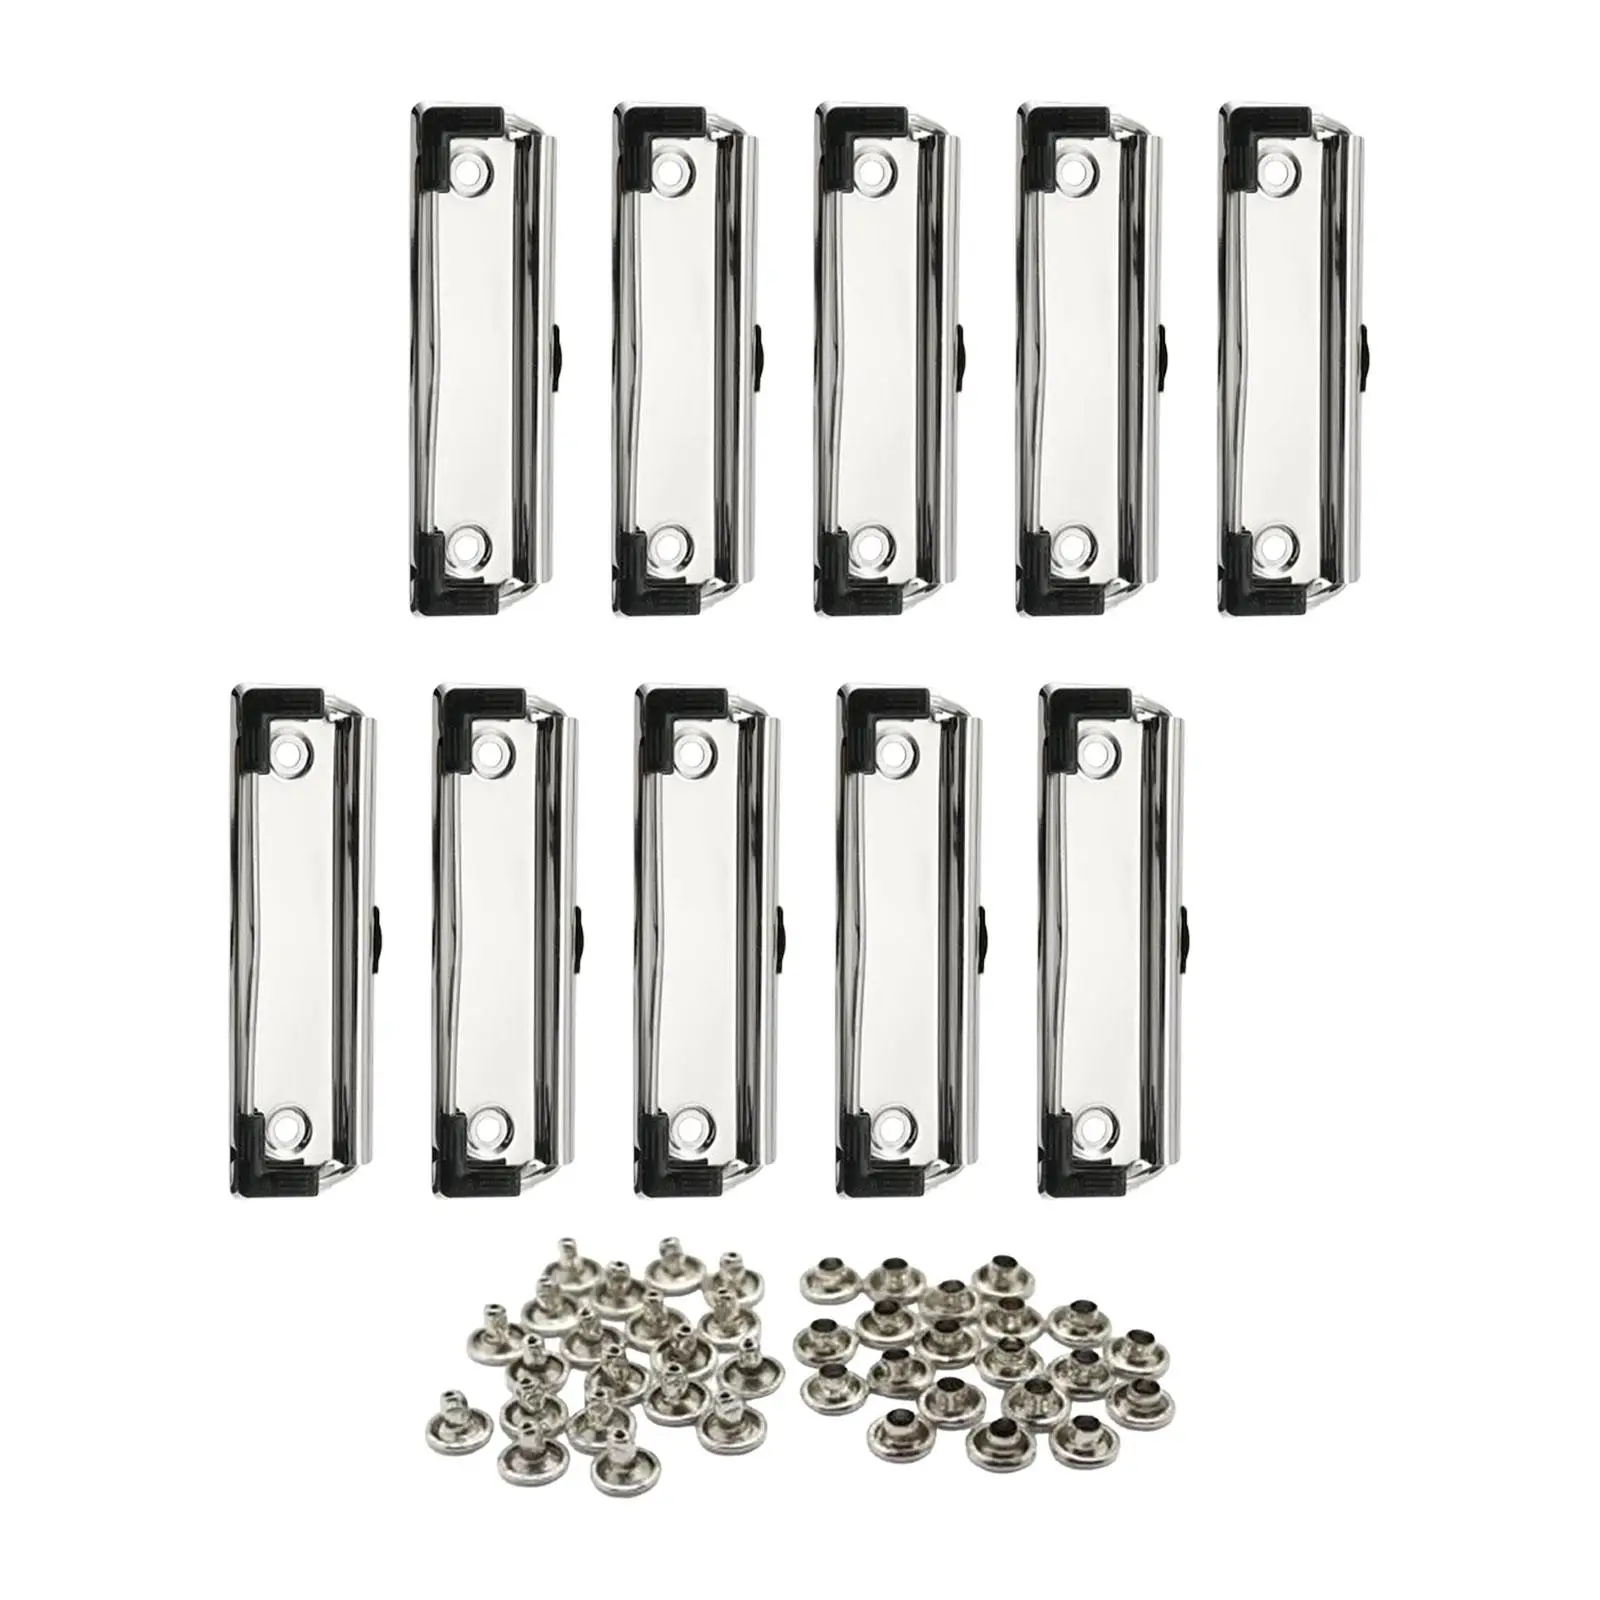 10x Office Low Profile Clipboard Clips Office Supplies Stationery Plate Holder Metal Clipboard Clips for Business School Office